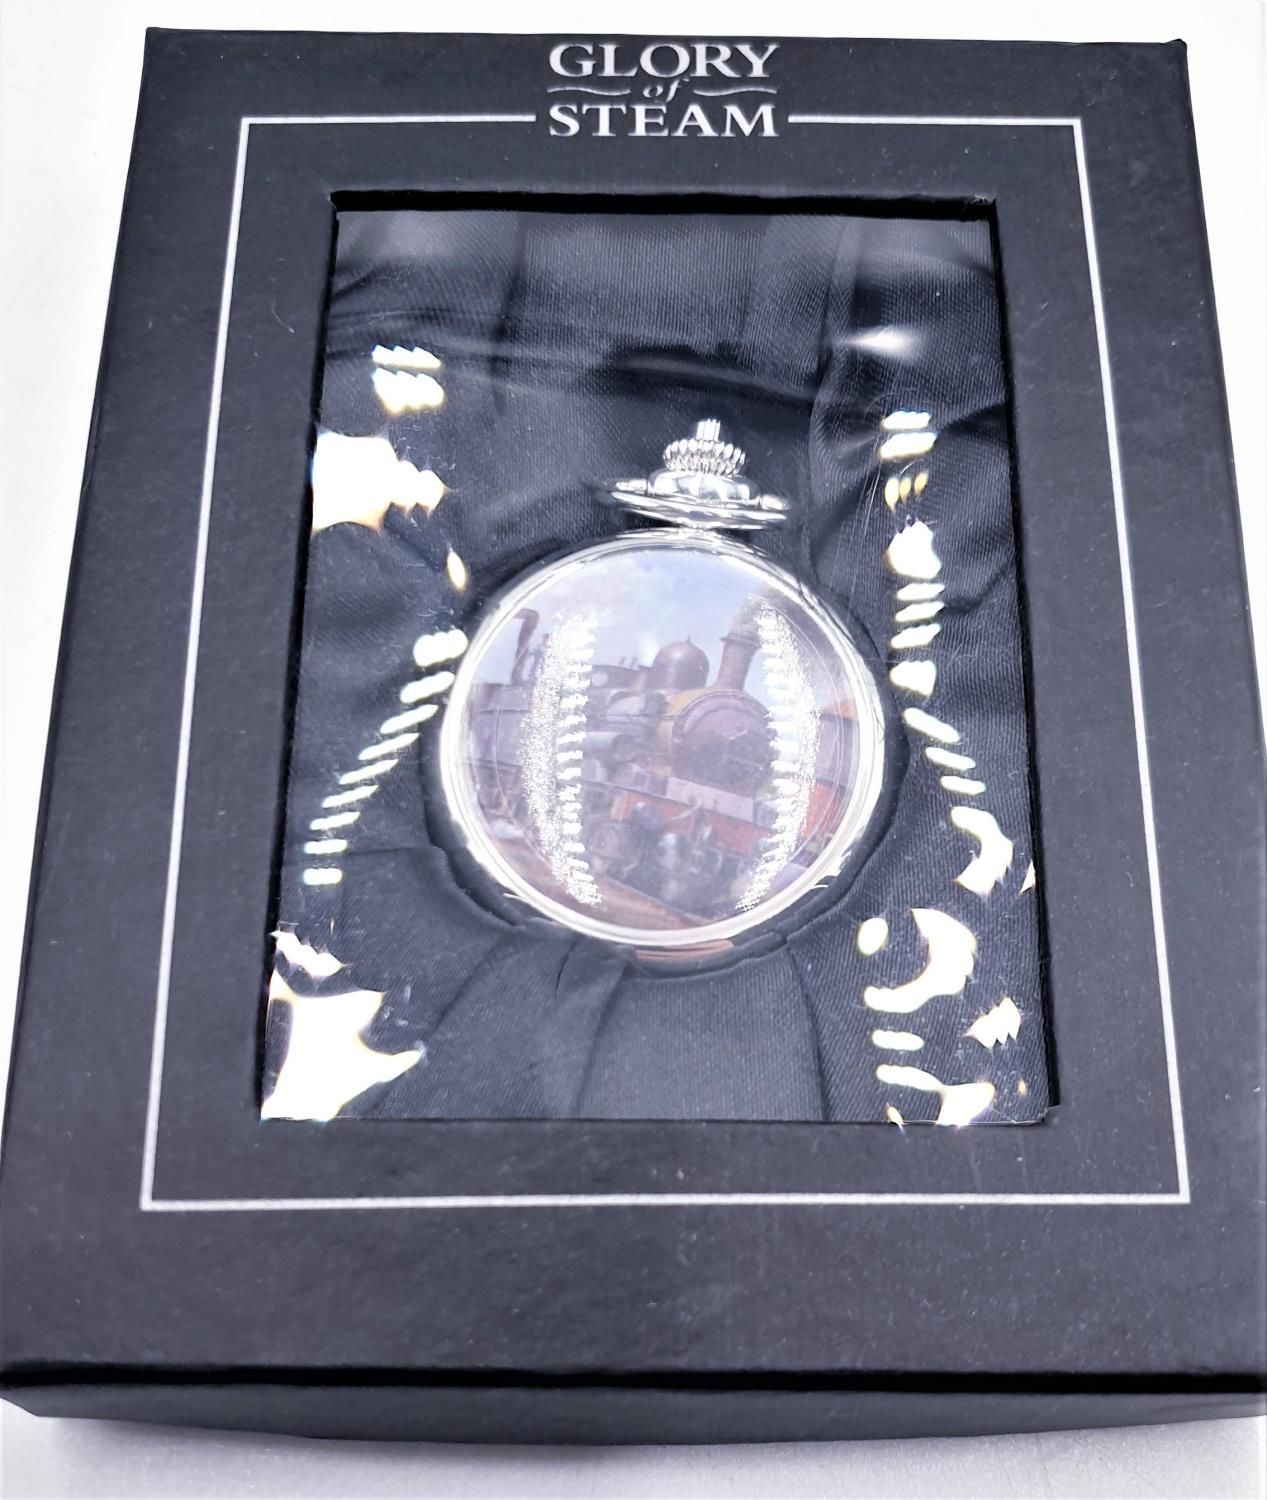 Null GLORY OF STEAM "DEAN GOODS CLASS" MECHANICAL (Wind Up) POCKET WATCH (Boxed)